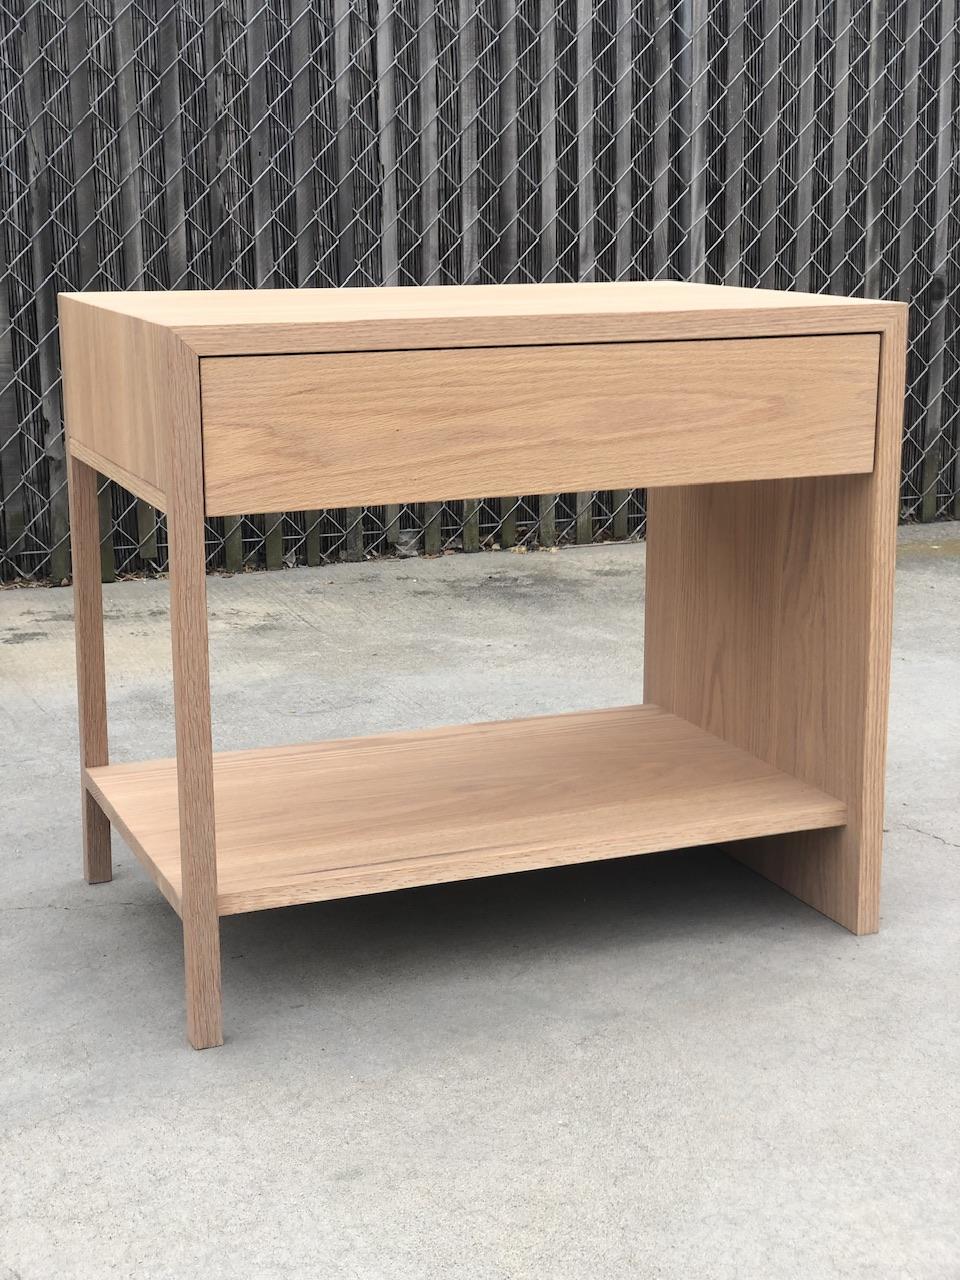 COAST  nightstand made out of Red Oak
  
Solid Oak case and drawer fronts. If purchasing as a set, additional nightsand can be made in mirror image. Solid drawer boxes with finger joint joinery. Hand made, mortise & tenon joinery. Blum Tandem under